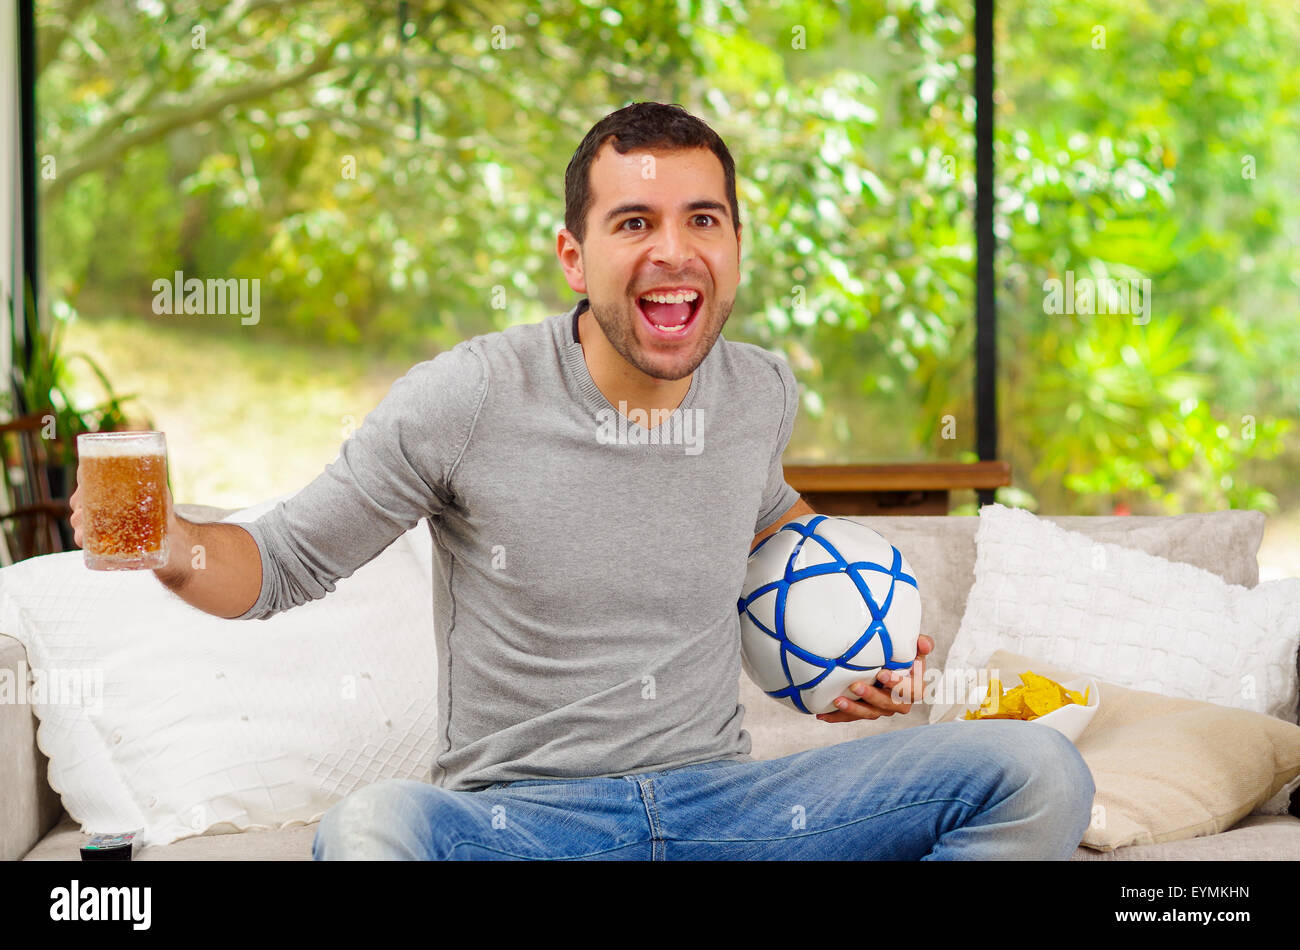 Hispanic man wearing denim jeans with grey sweater sitting in sofa enthusiastically cheerful facial expression watching tv holding beer and football Stock Photo